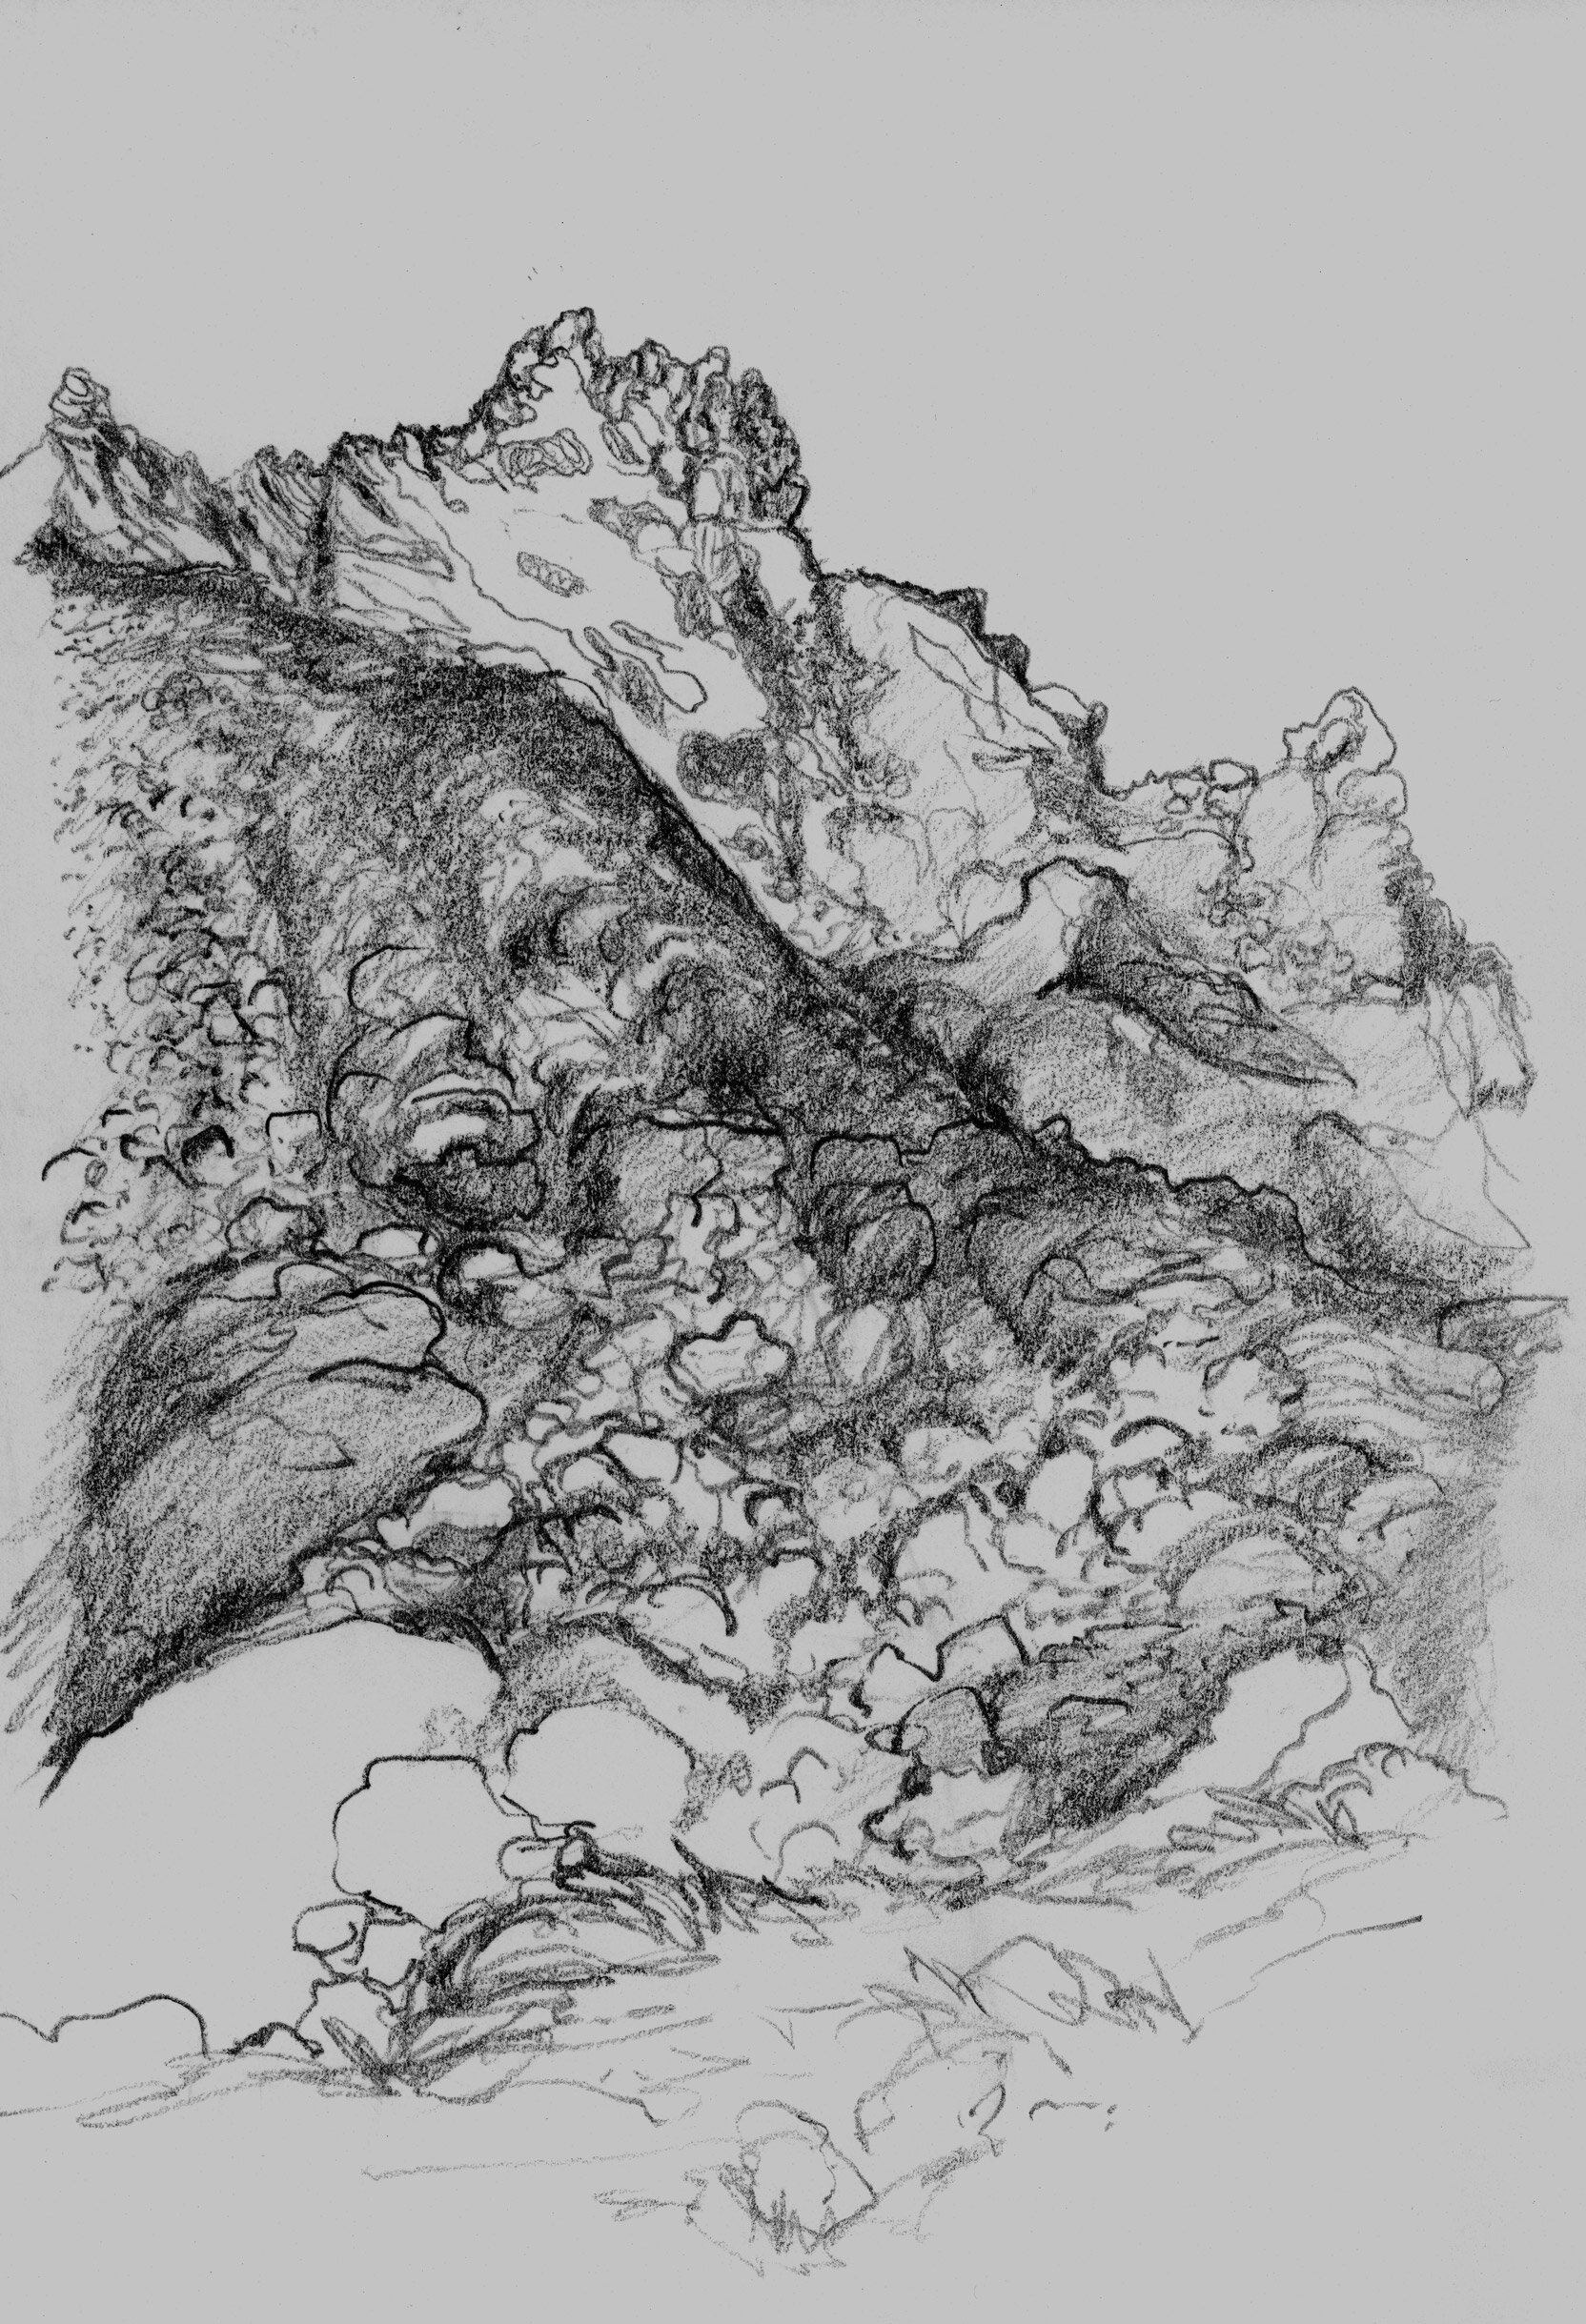   Gosainkunda Nepal High Camp  2013 Pencil on paper 7.5x5 inches 